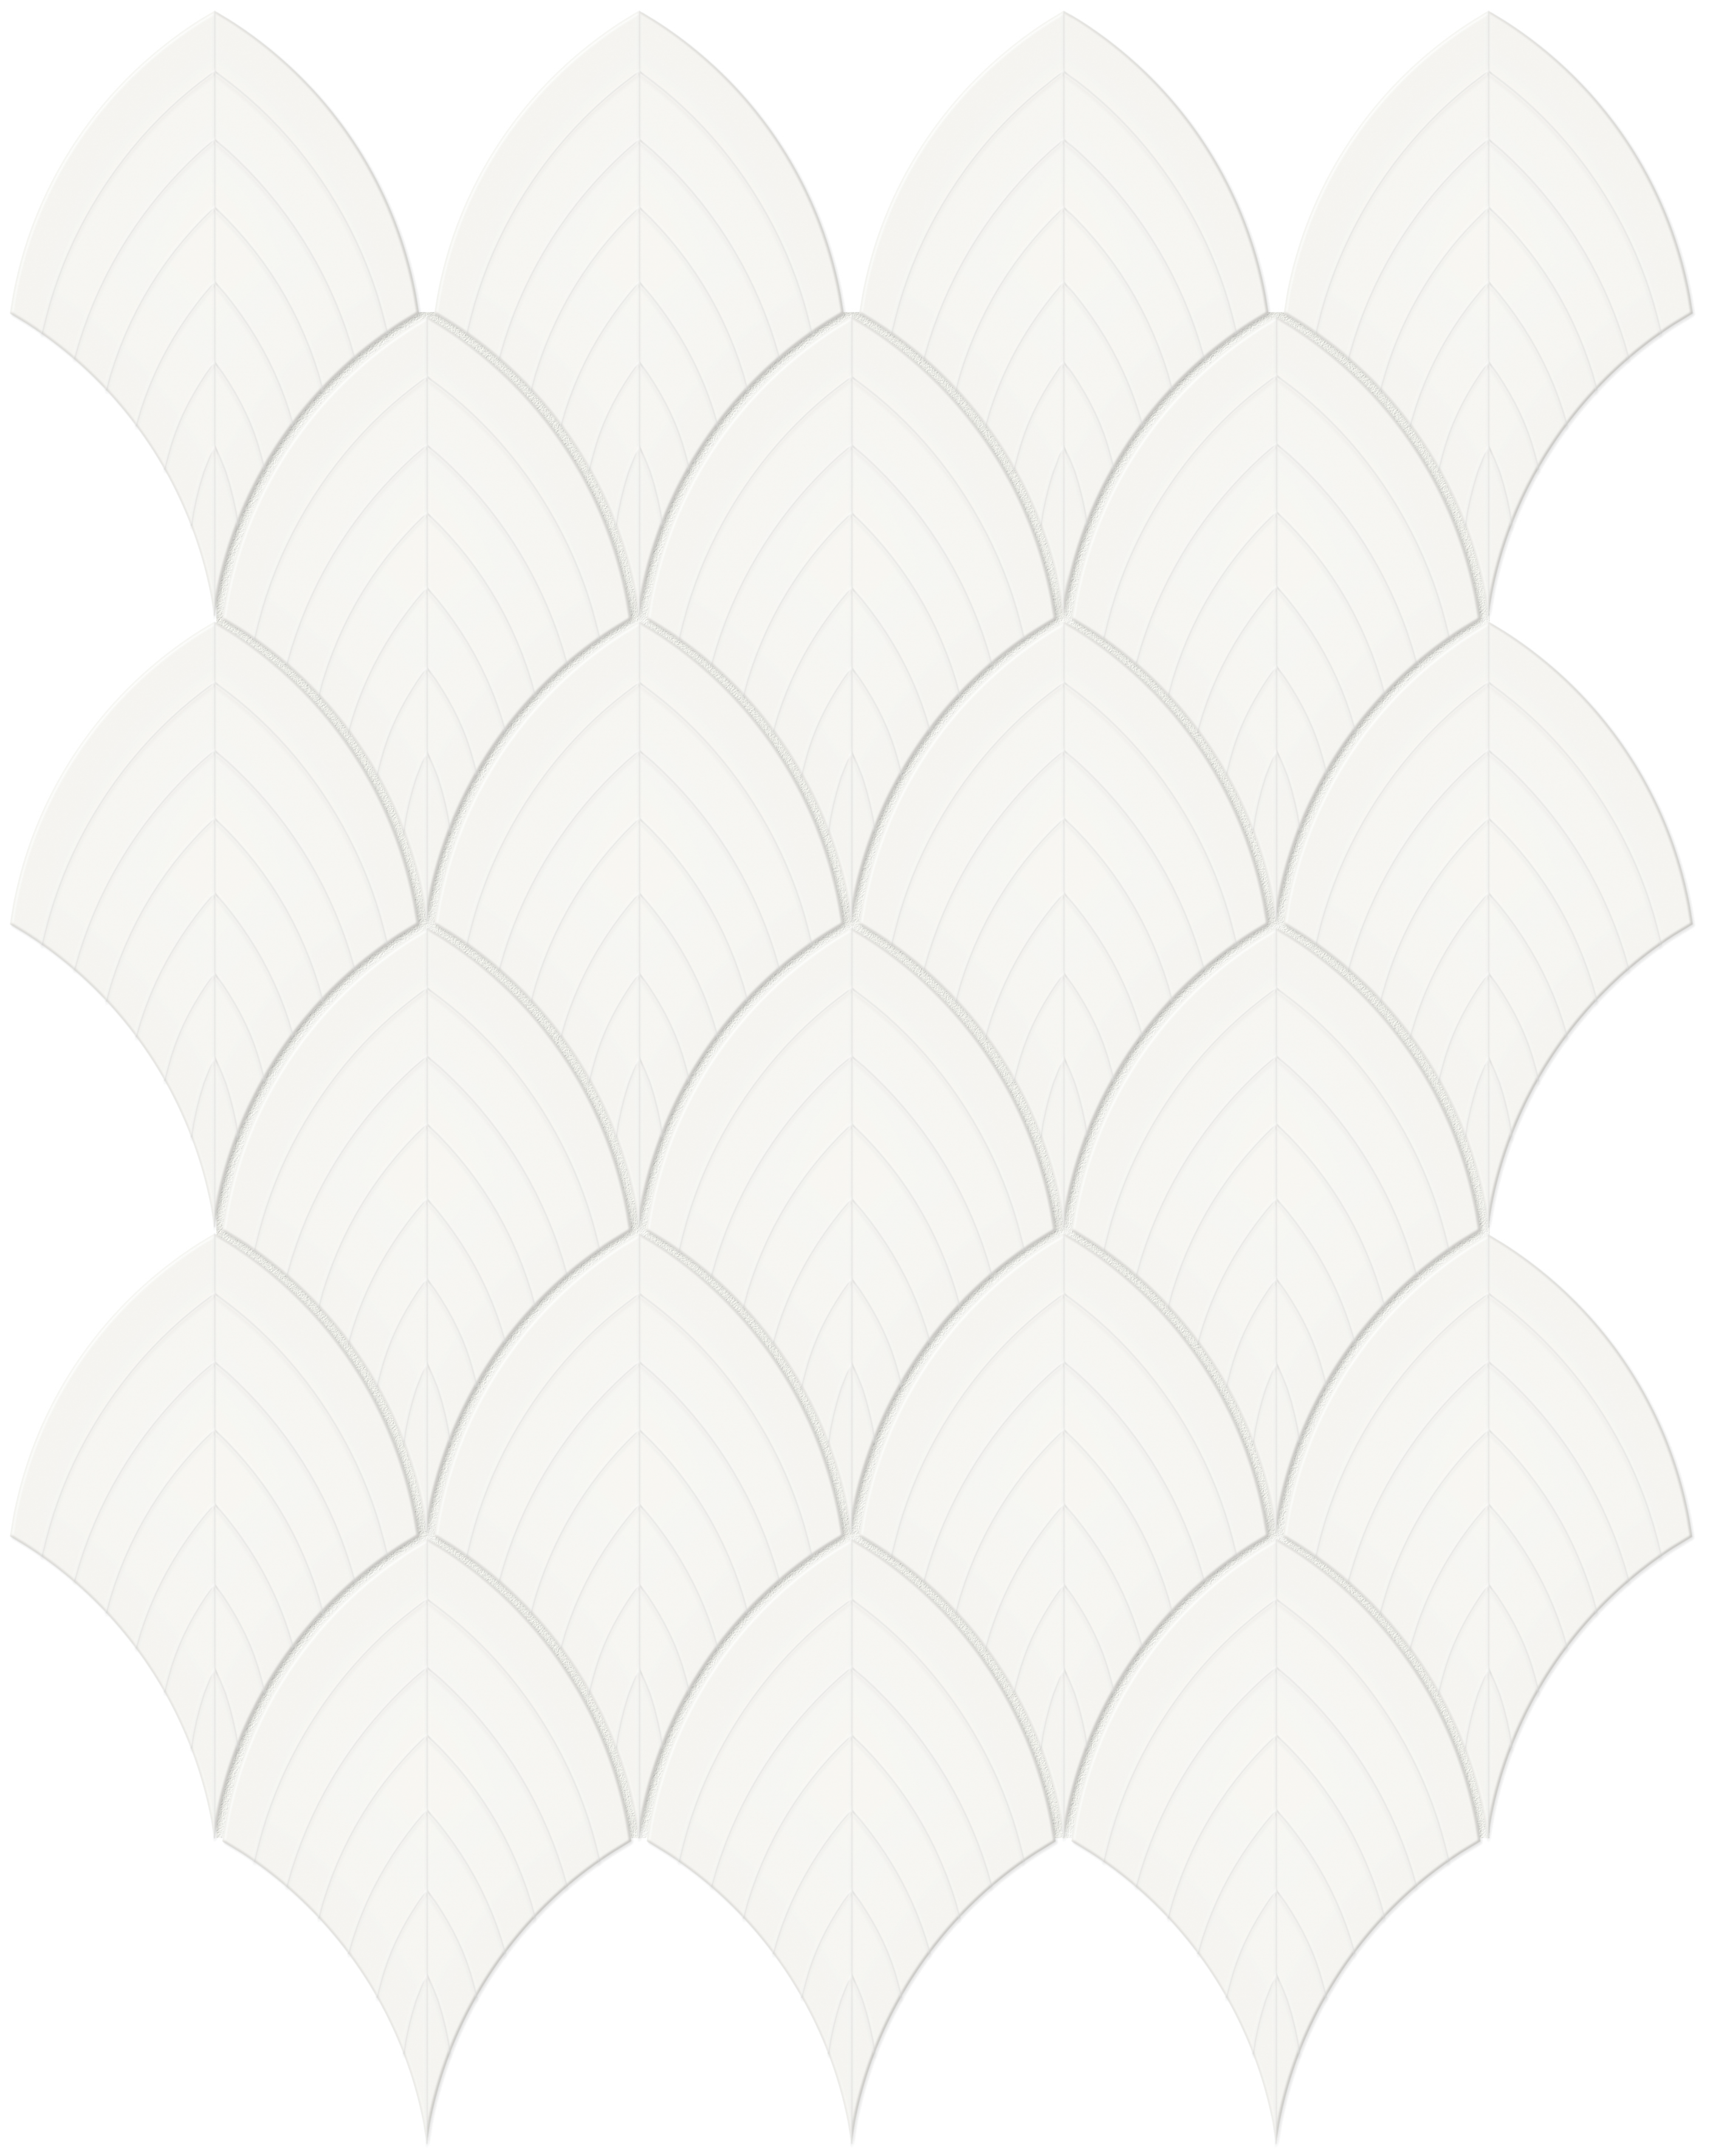 canvas white embossed scallop pattern glazed porcelain wall mosaic from soho anatolia collection distributed by surface group international glossy finish pressed edge mesh shape